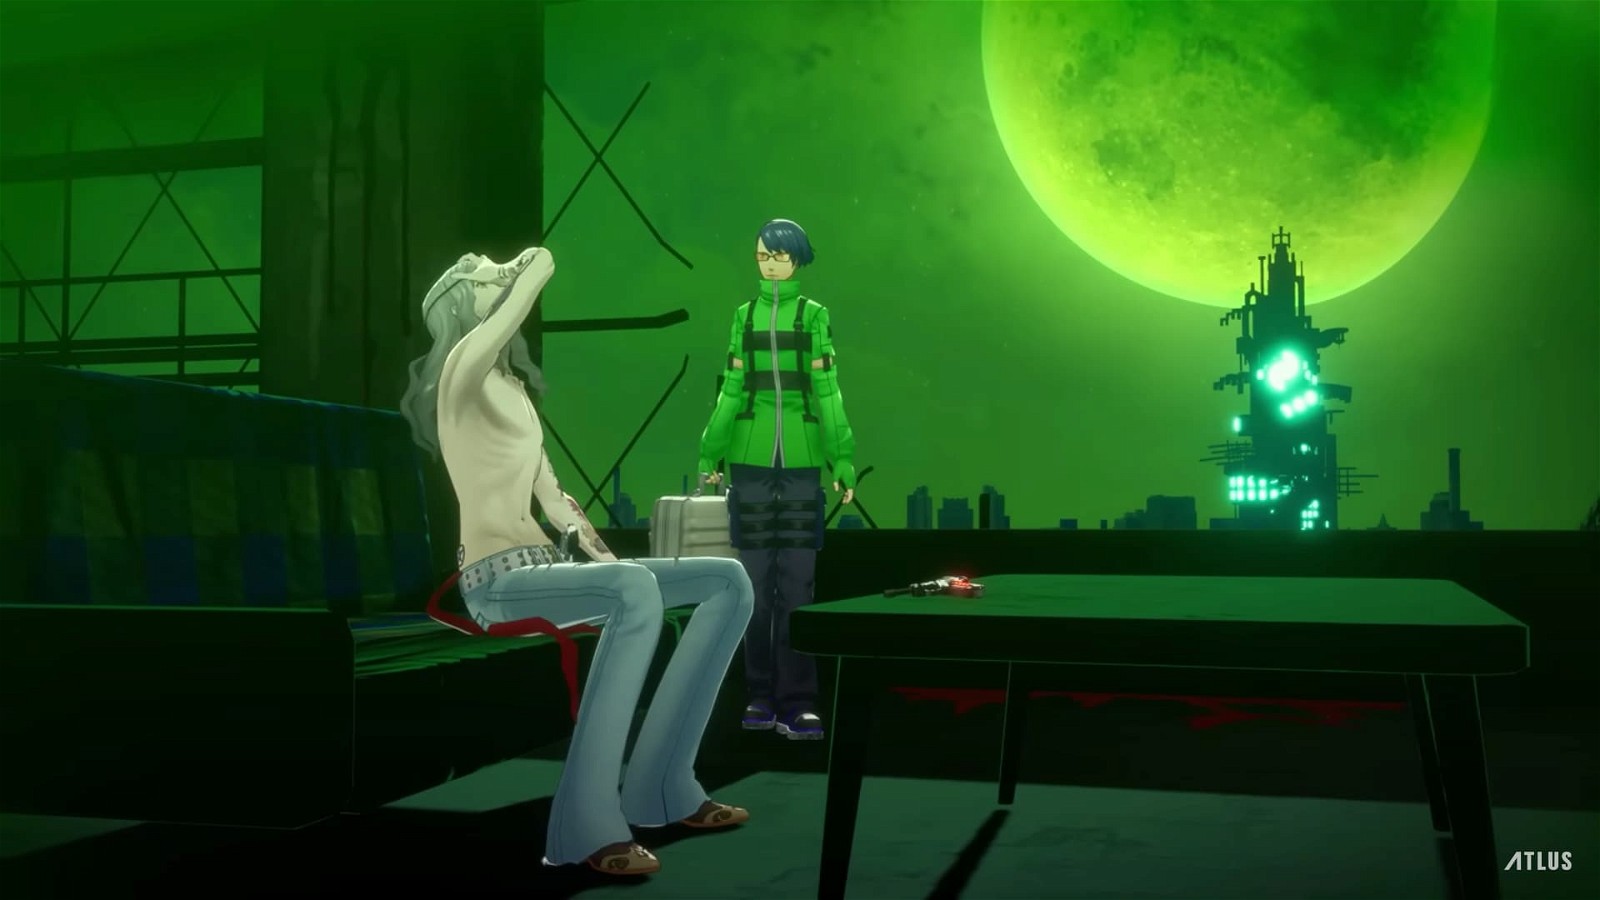 Persona 3 Reload will have a new episode focusing on Strega